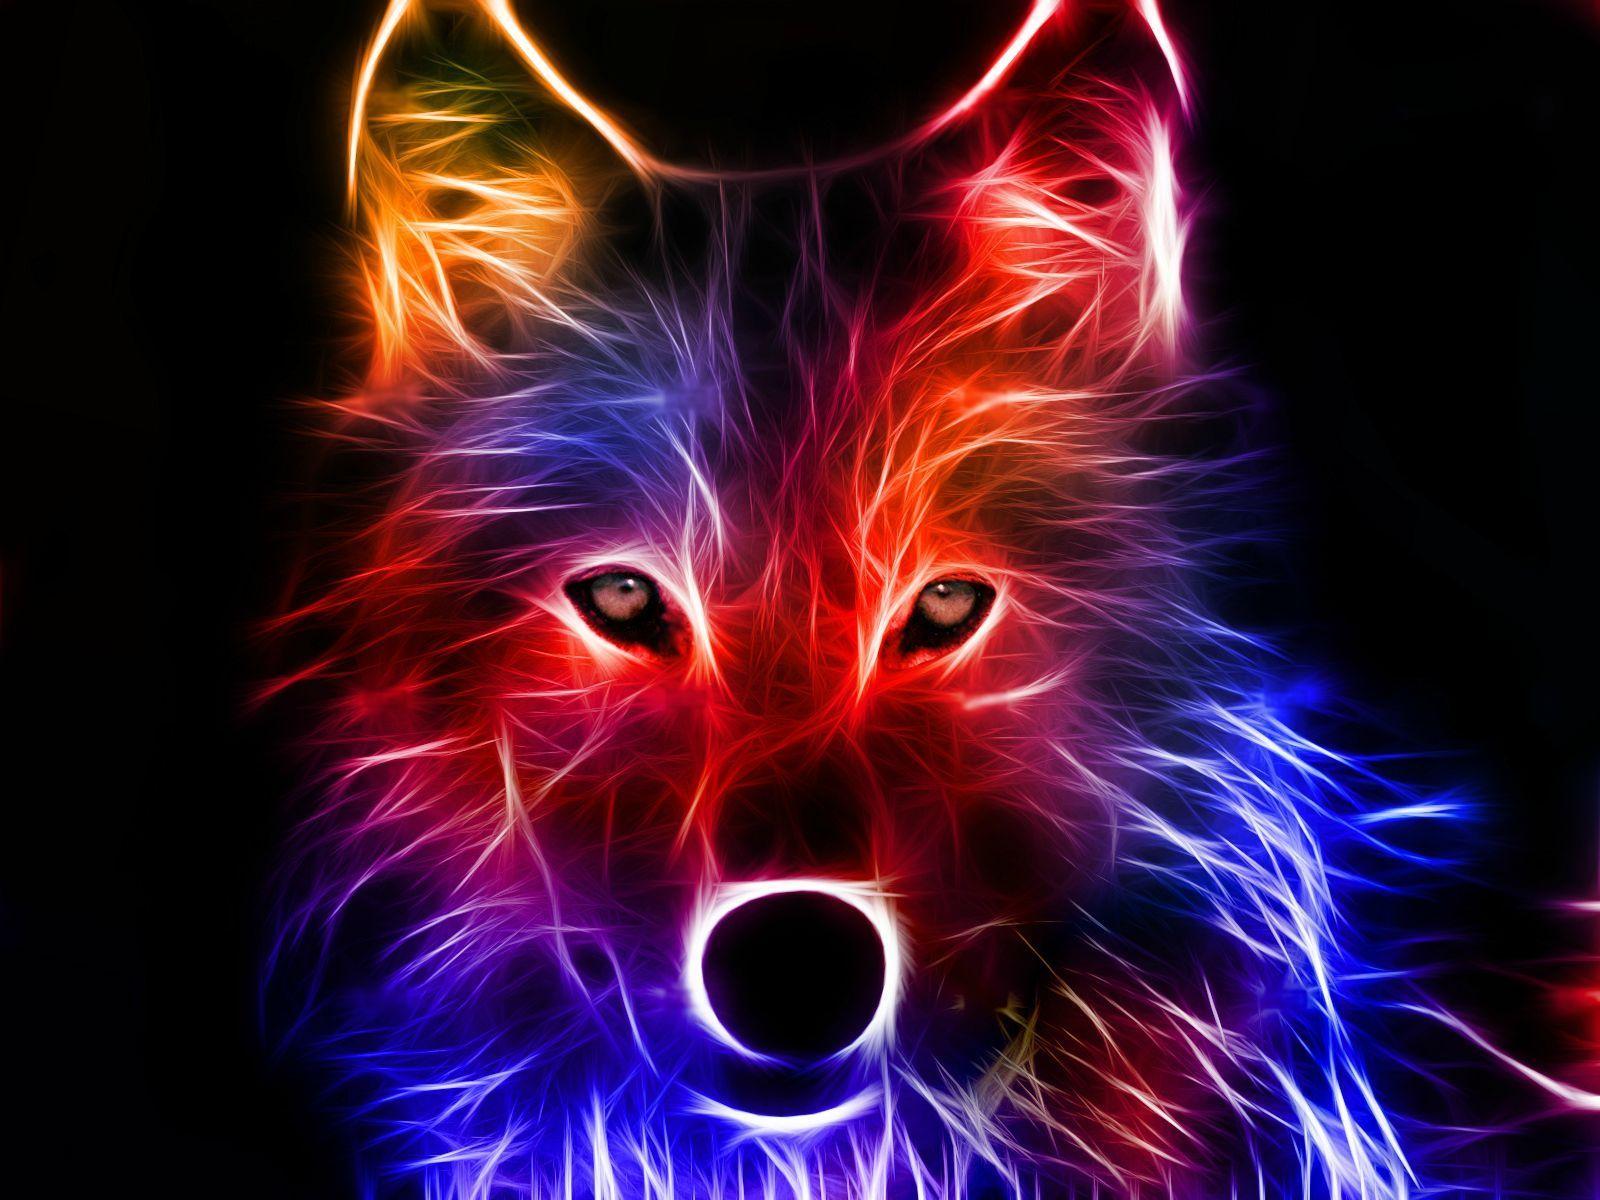 3D Wolf Wallpaper Free Desktop And Mobile Wallpaper. Wolf wallpaper, Abstract wolf, Cool background